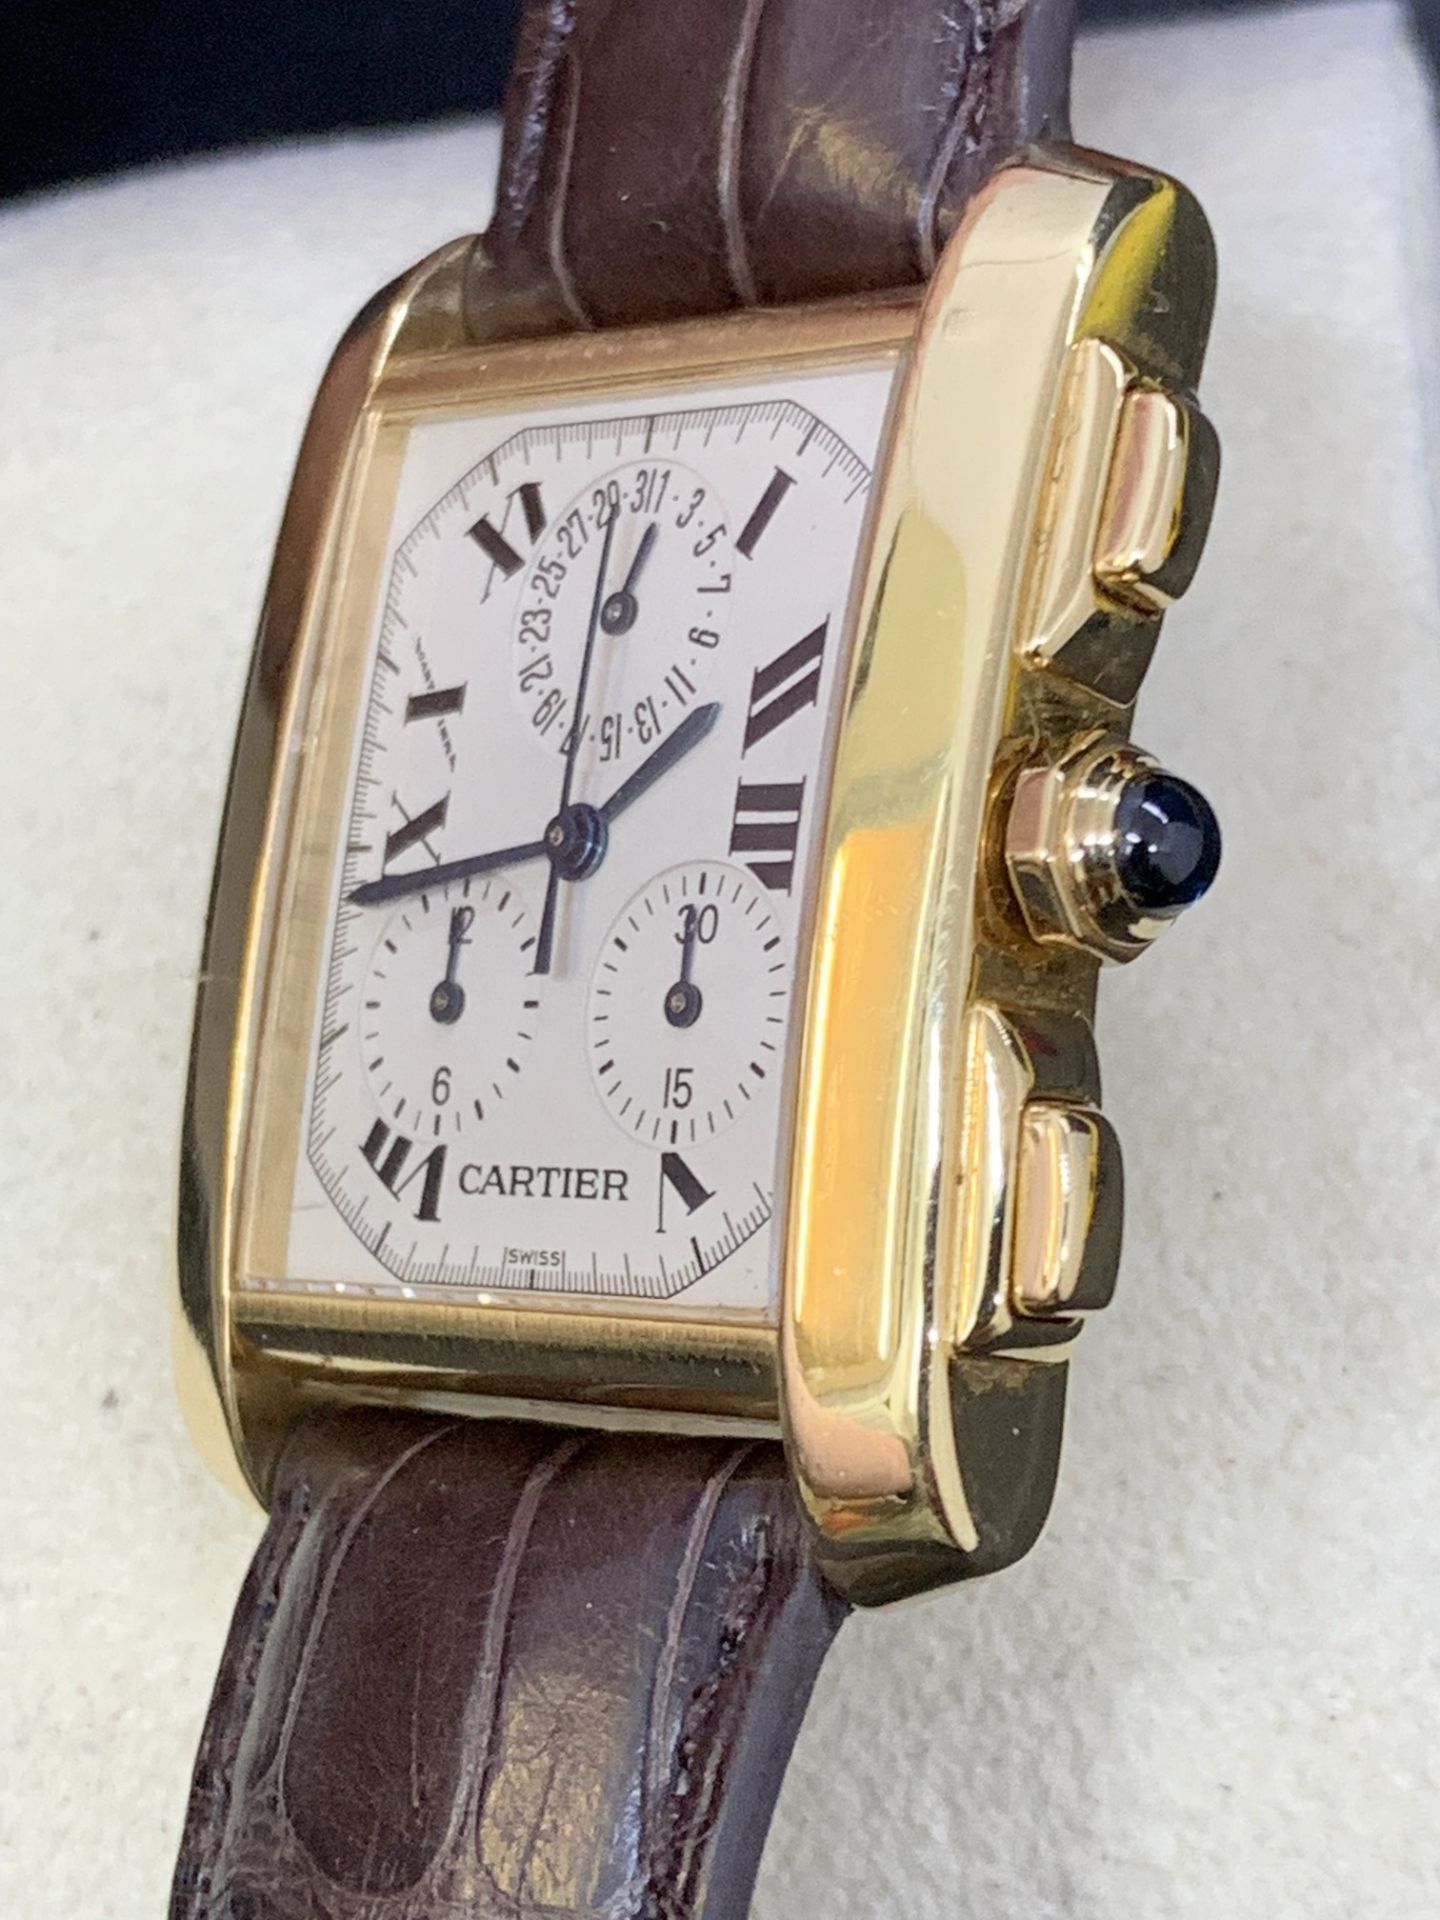 CARTIER 18ct GOLD CHRONOGRAPH WATCH - Image 4 of 11